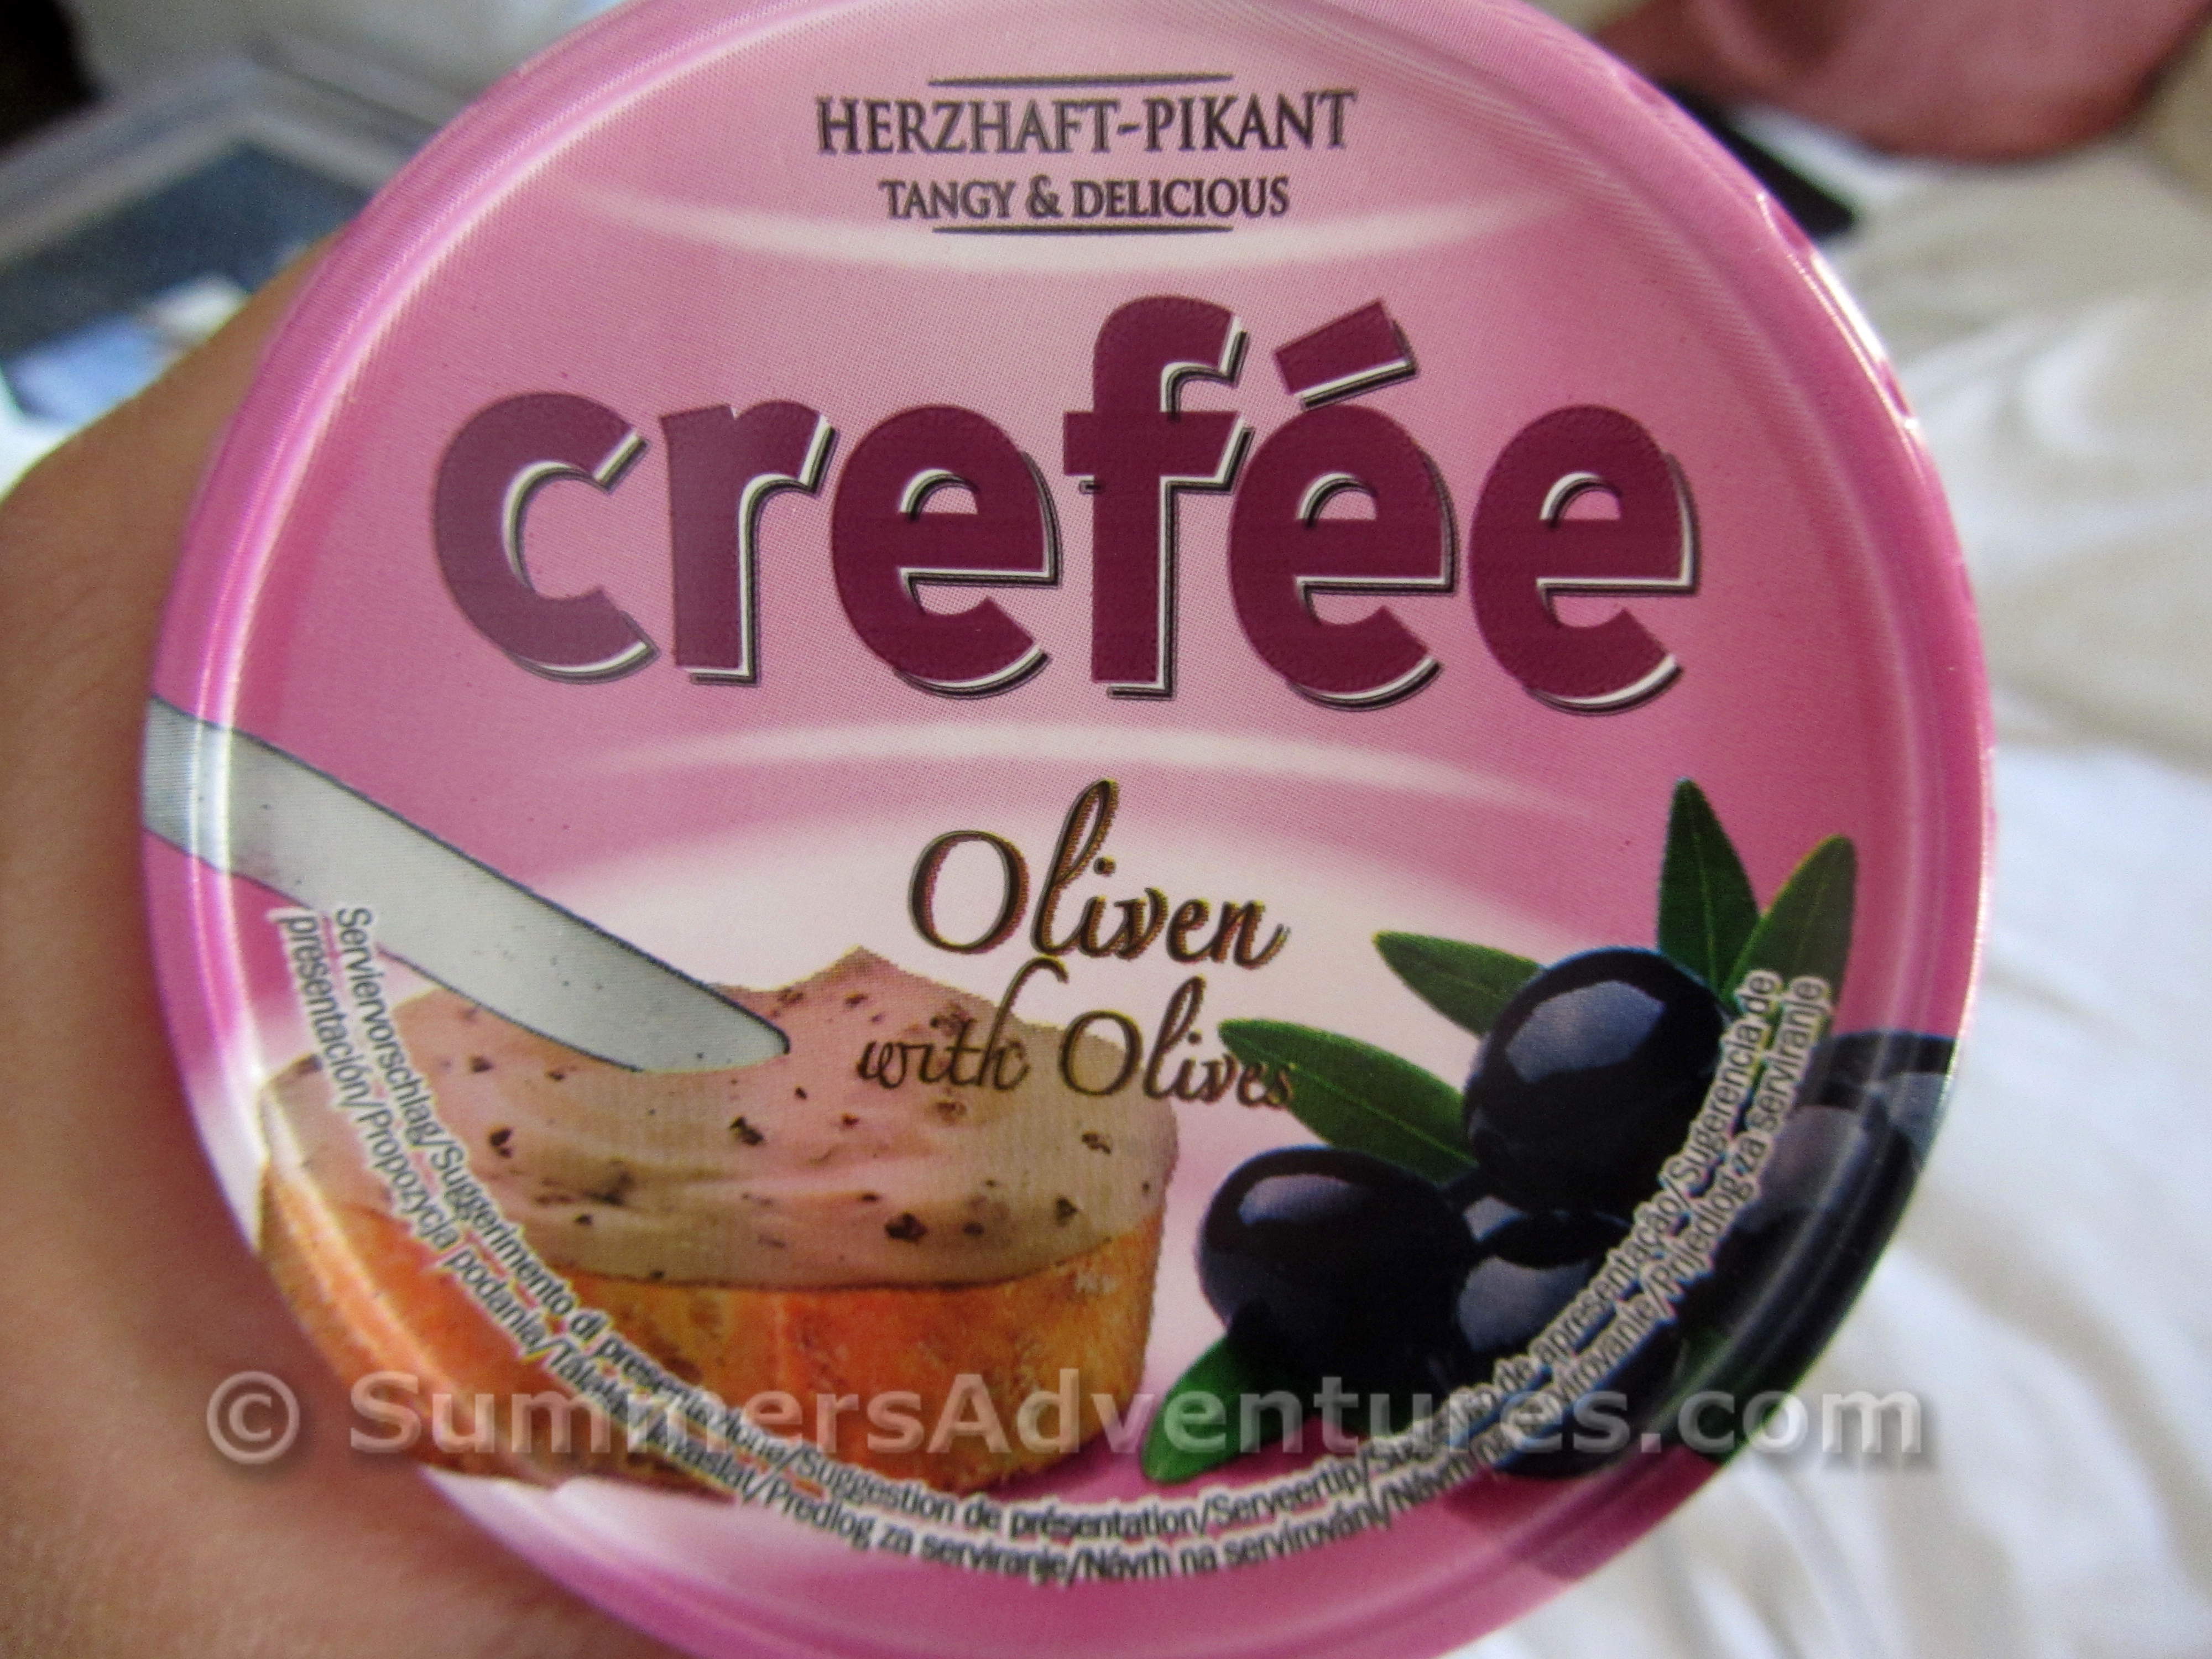 Olive Spread